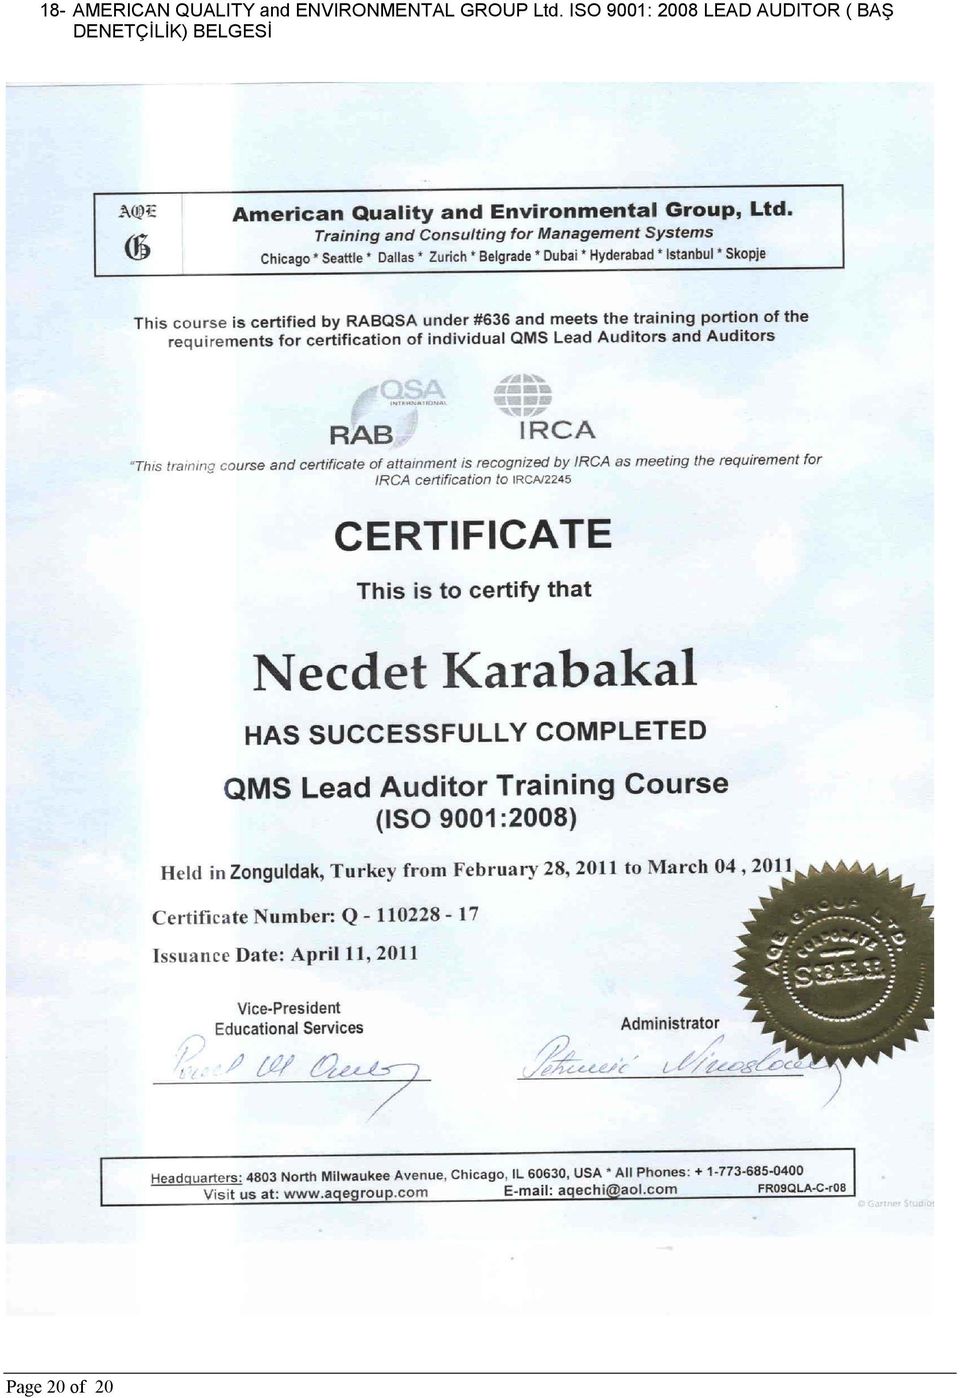 ISO 9001: 2008 LEAD AUDITOR (